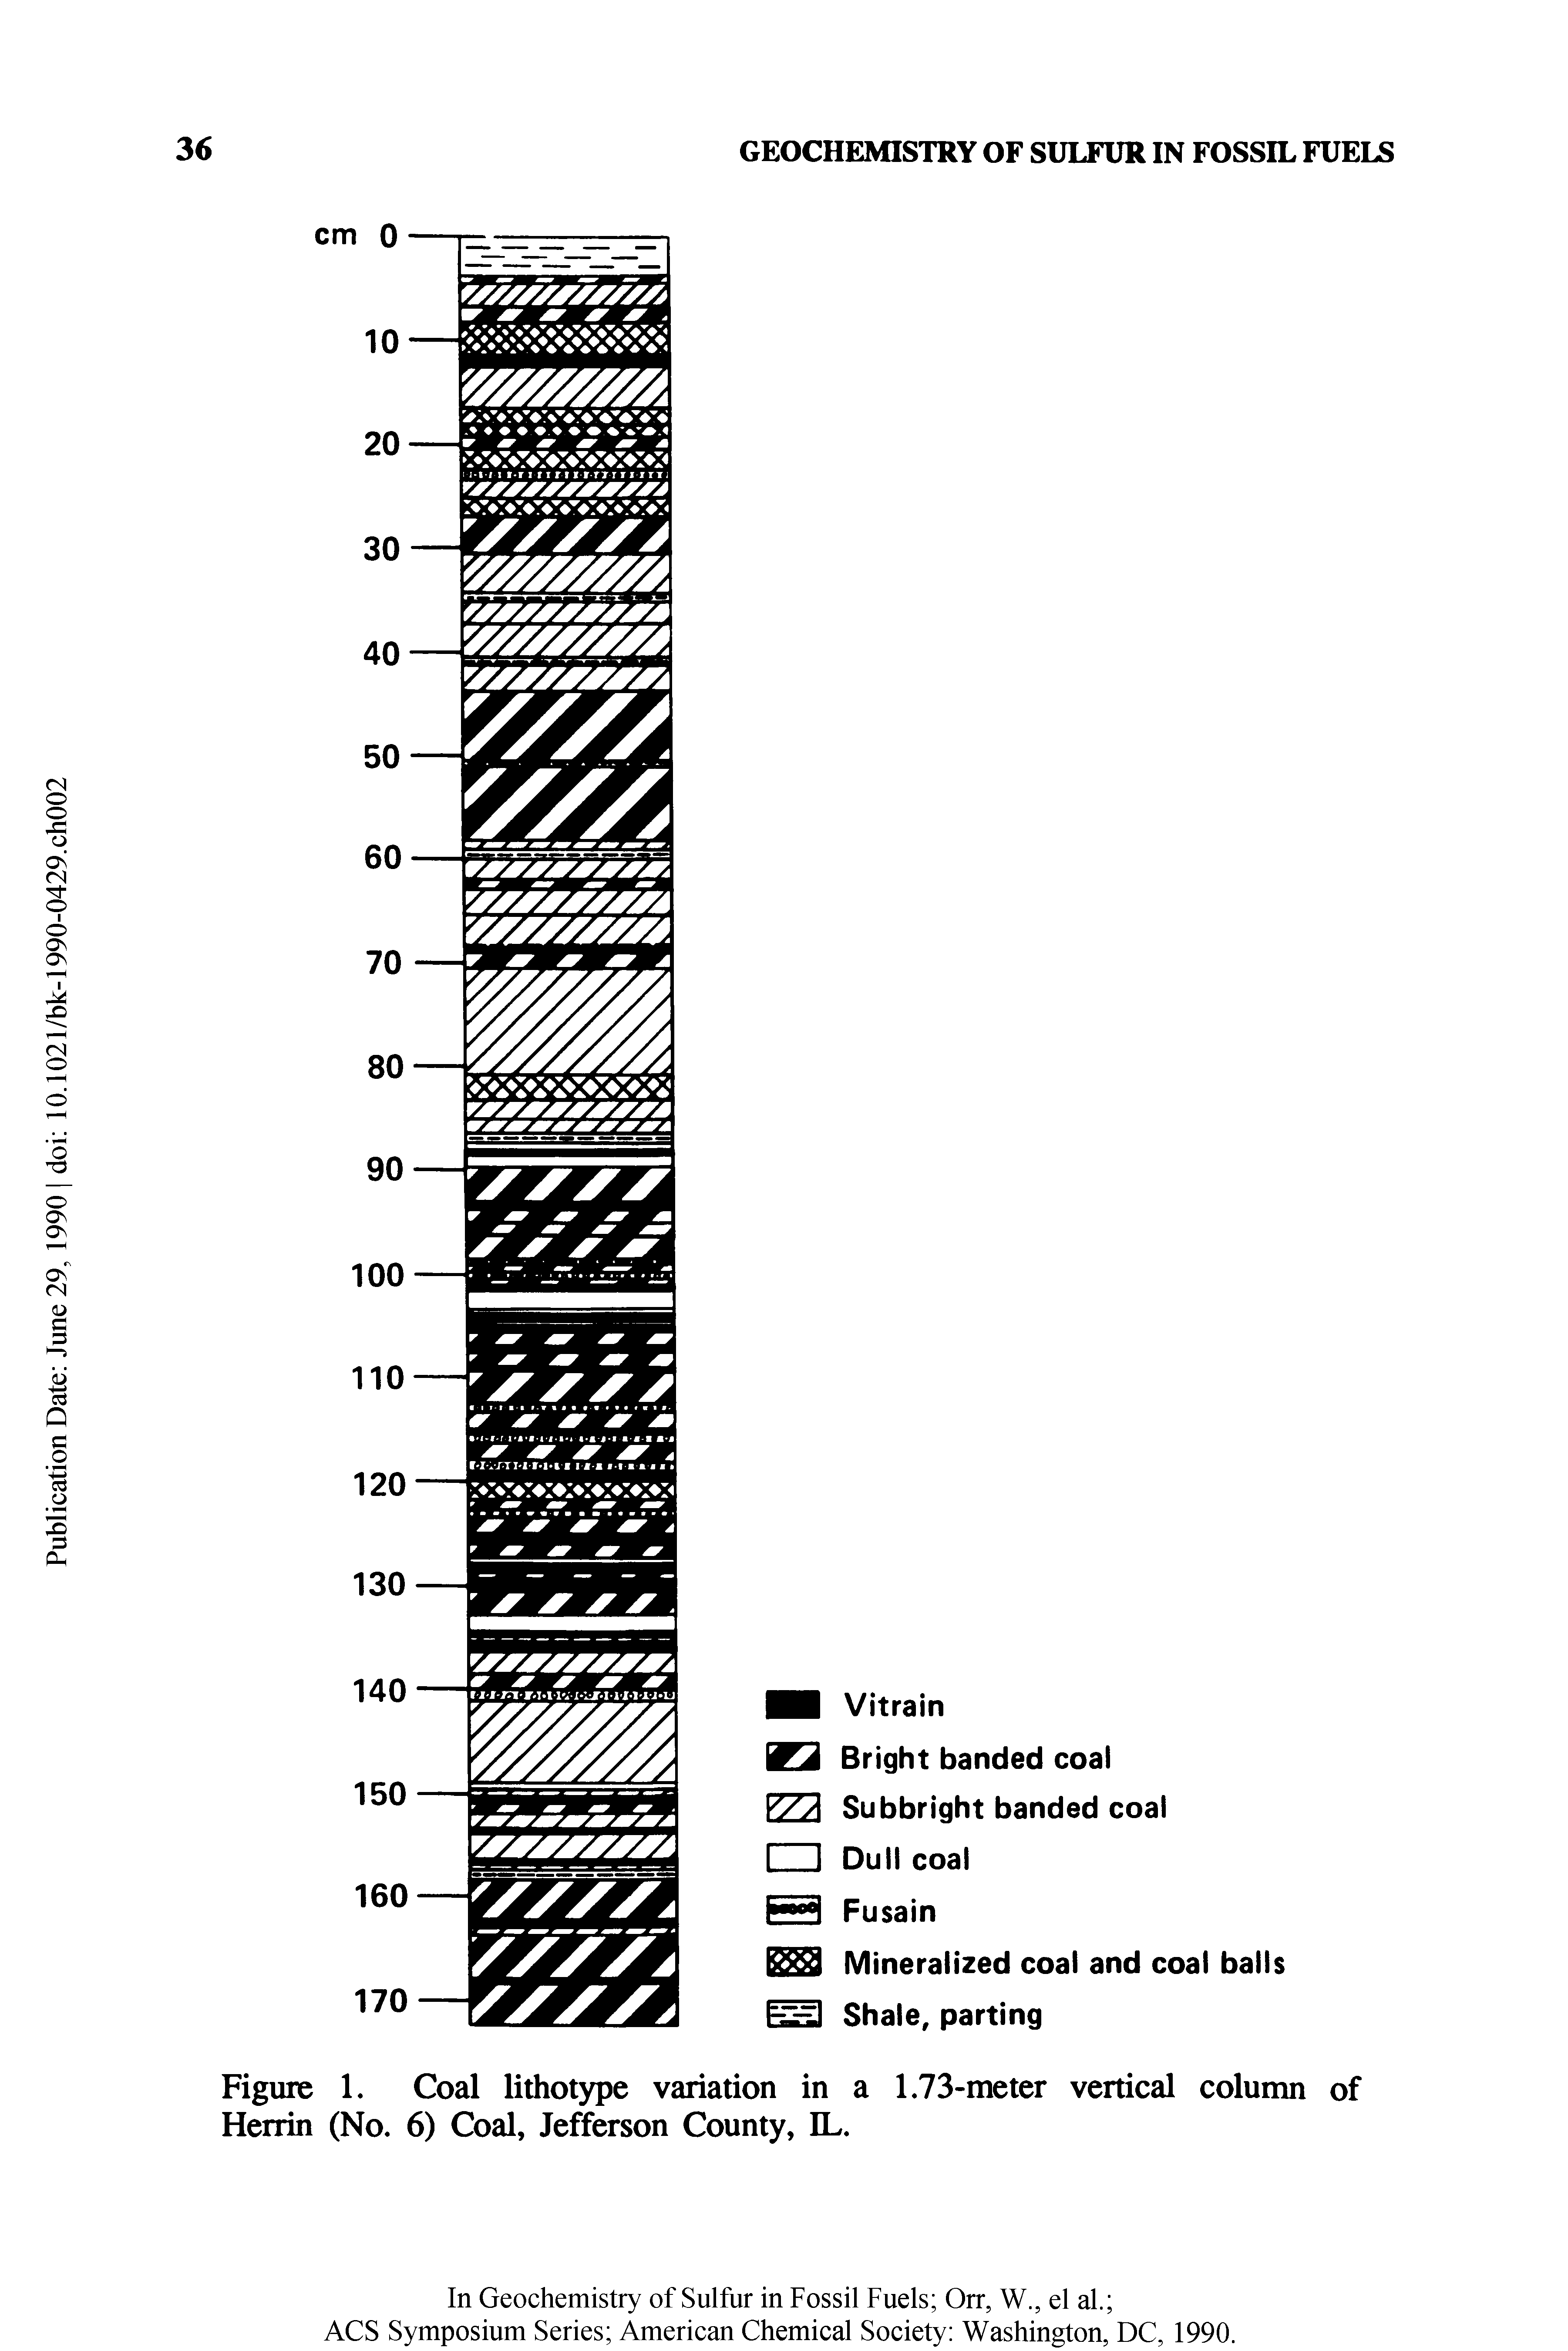 Figure 1. Coal lithotype variation in a 1.73-meter vertical column of Herrin (No. 6) Coal, Jefferson County, IL.